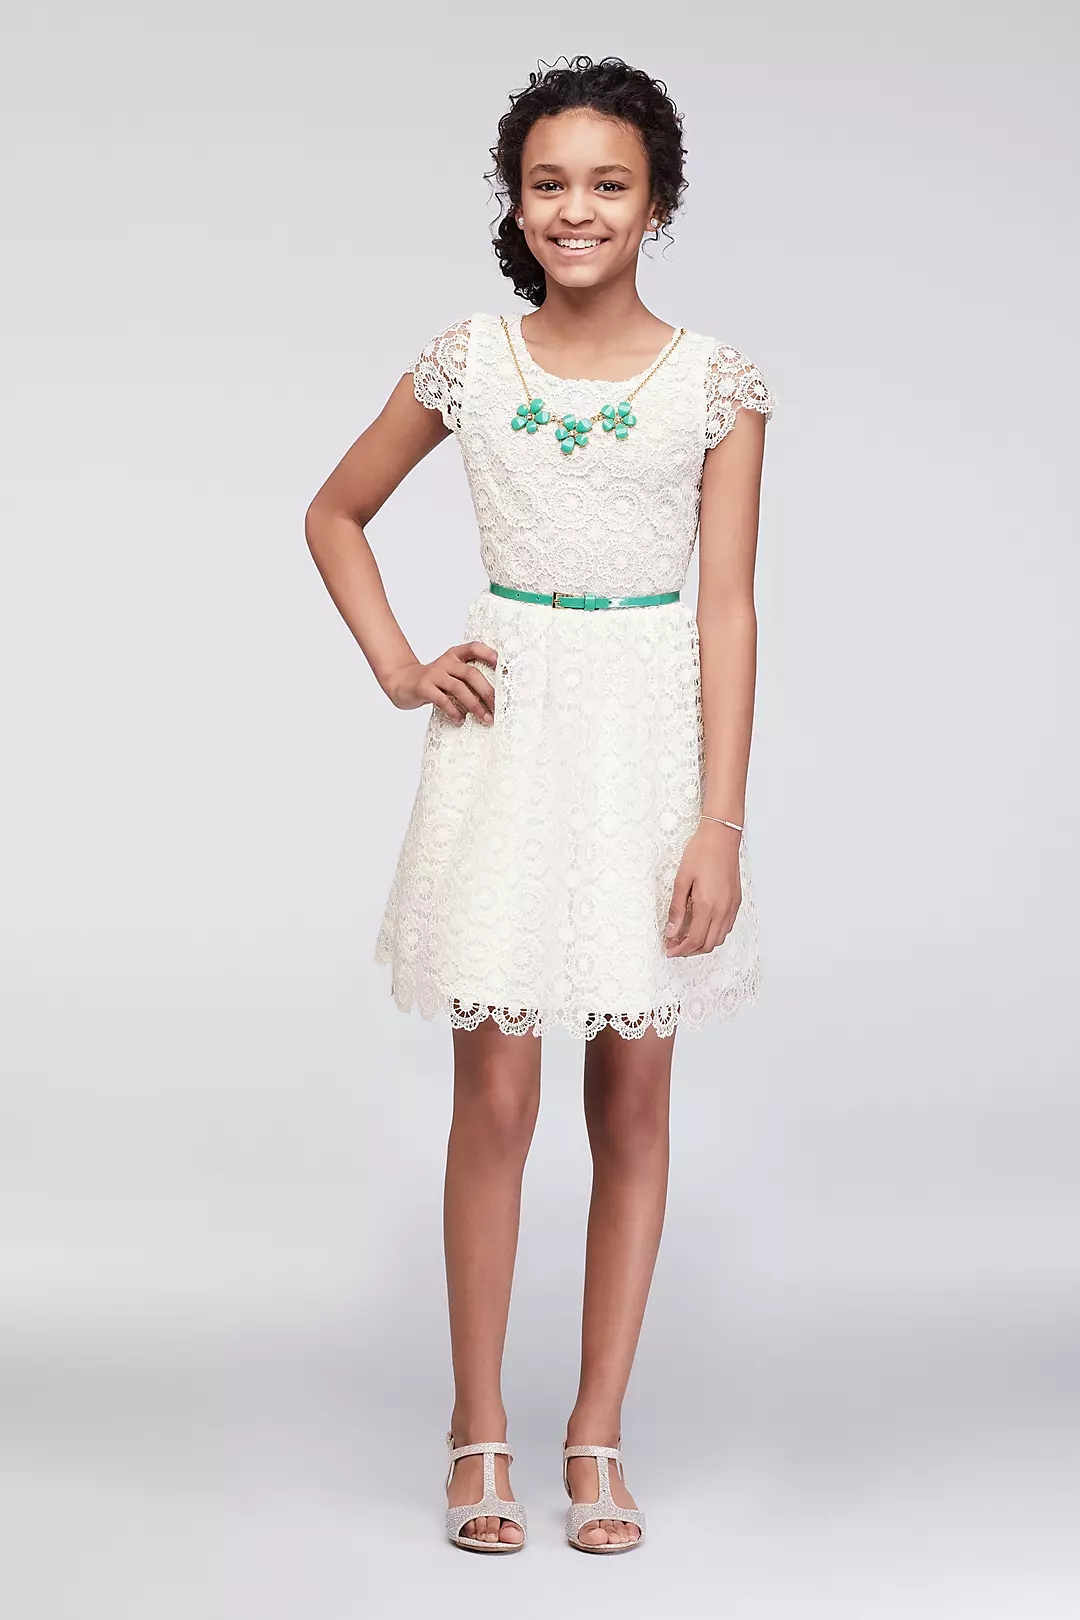 Cap Sleeve Lace Dress with Necklace and Belt Image